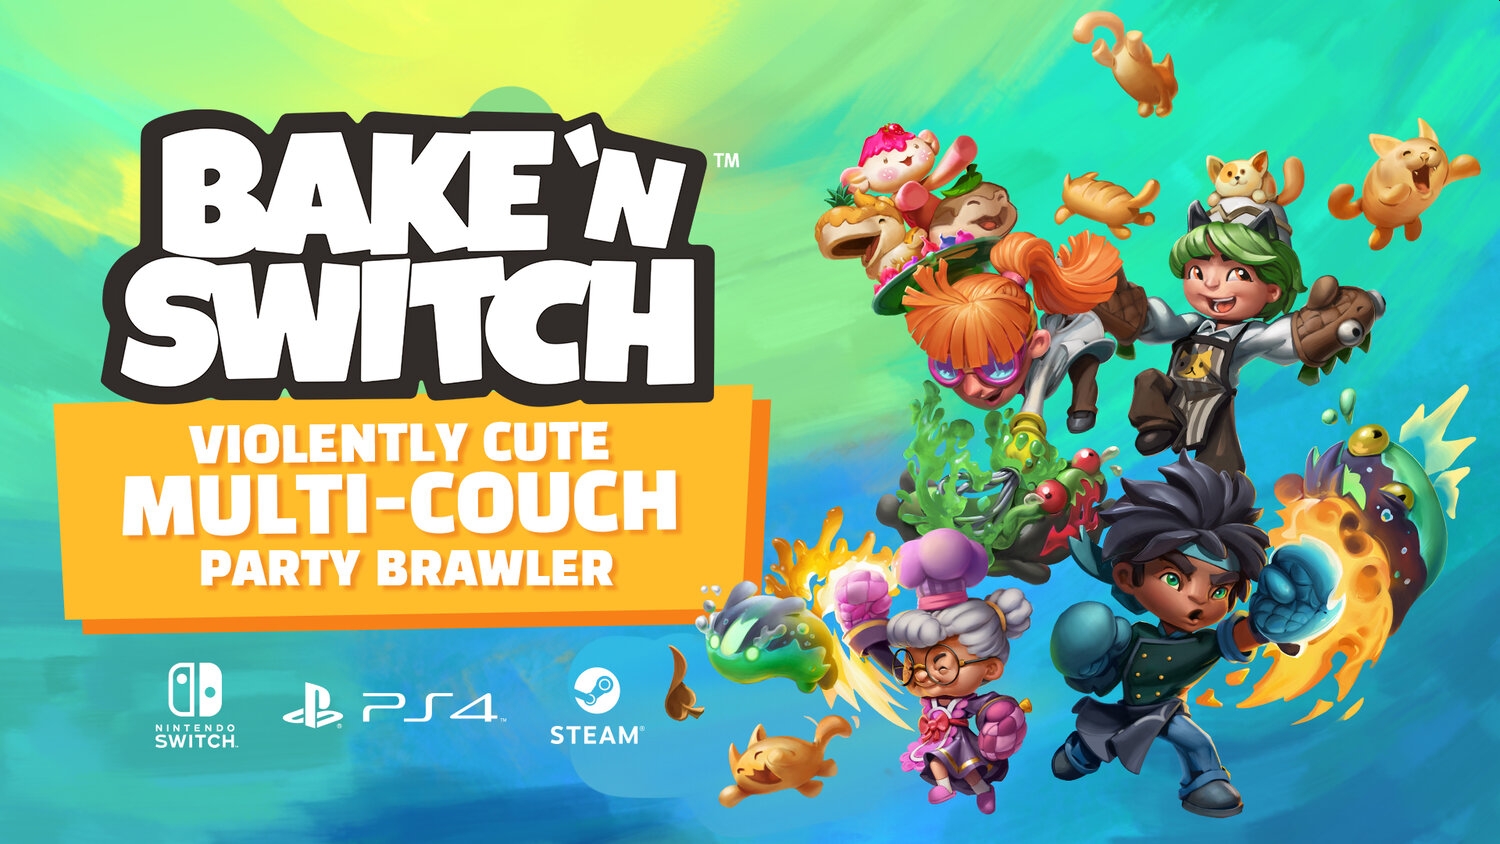 Streamline Games’s Party Brawler Bake ‘n Switch Announced For PC And Consoles